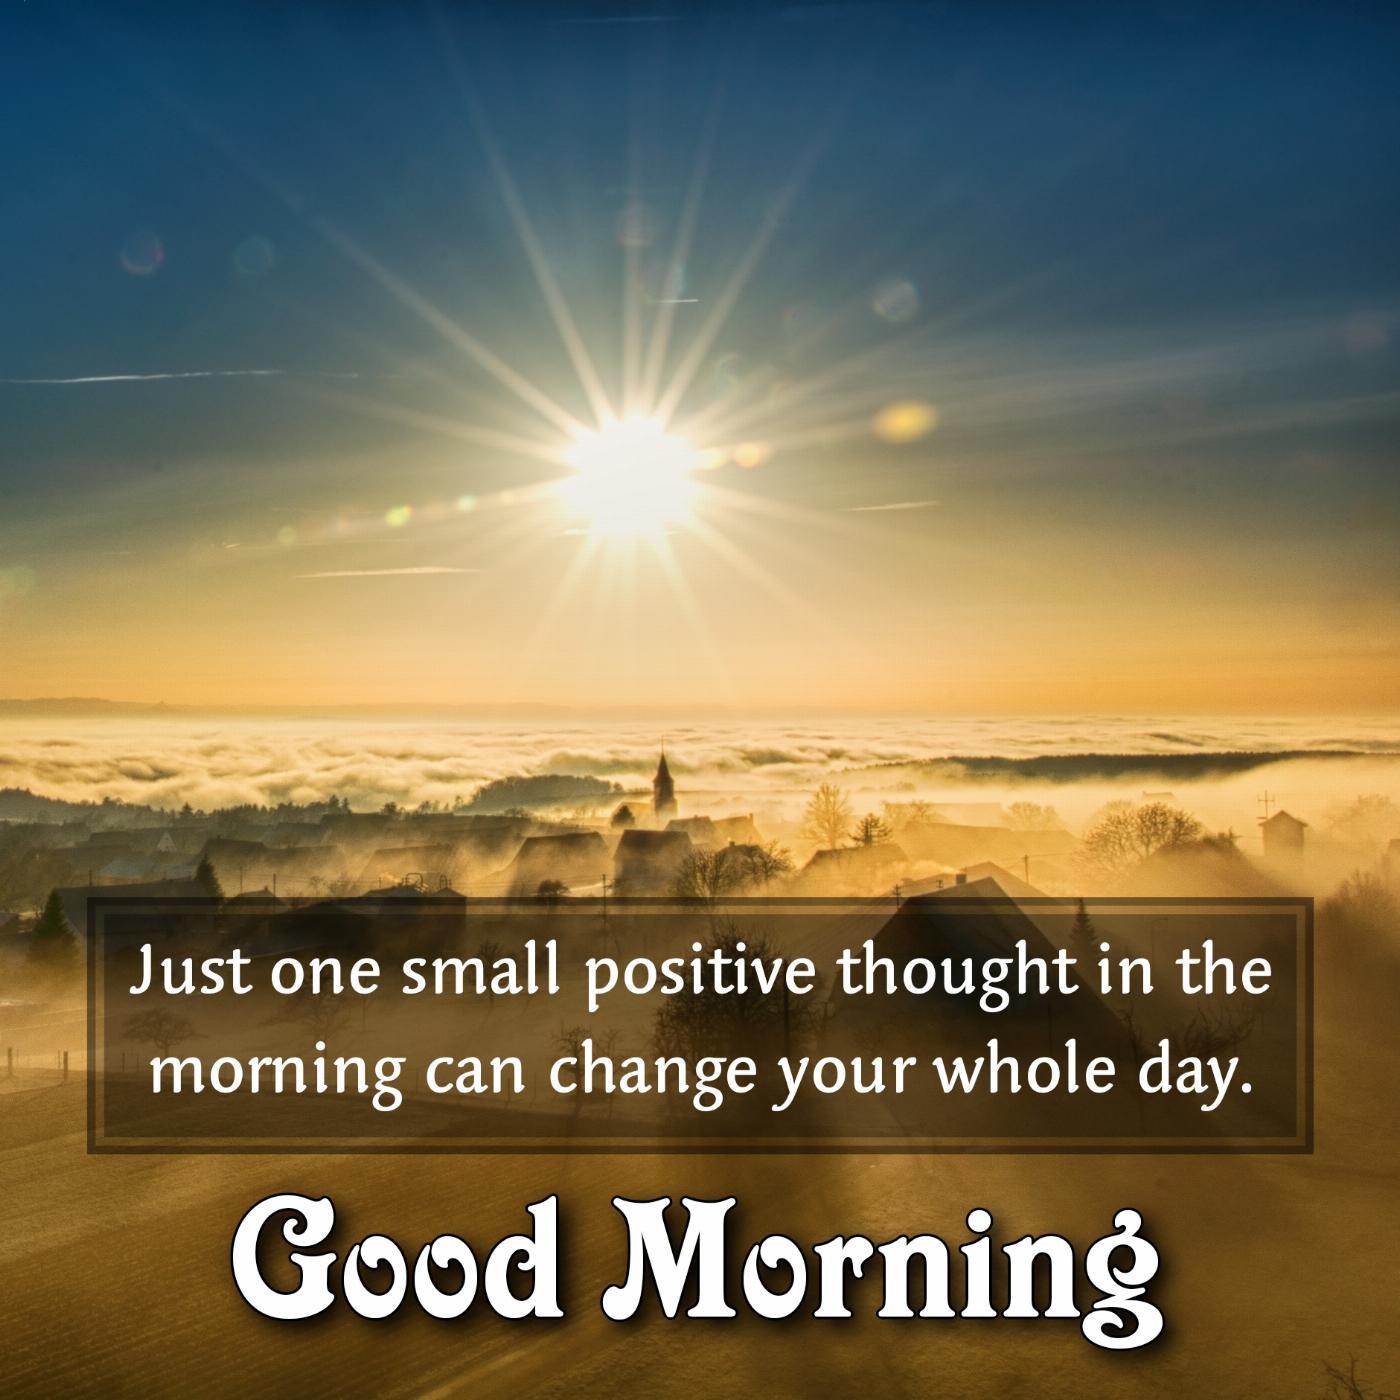 Just one small positive thought in the morning can change